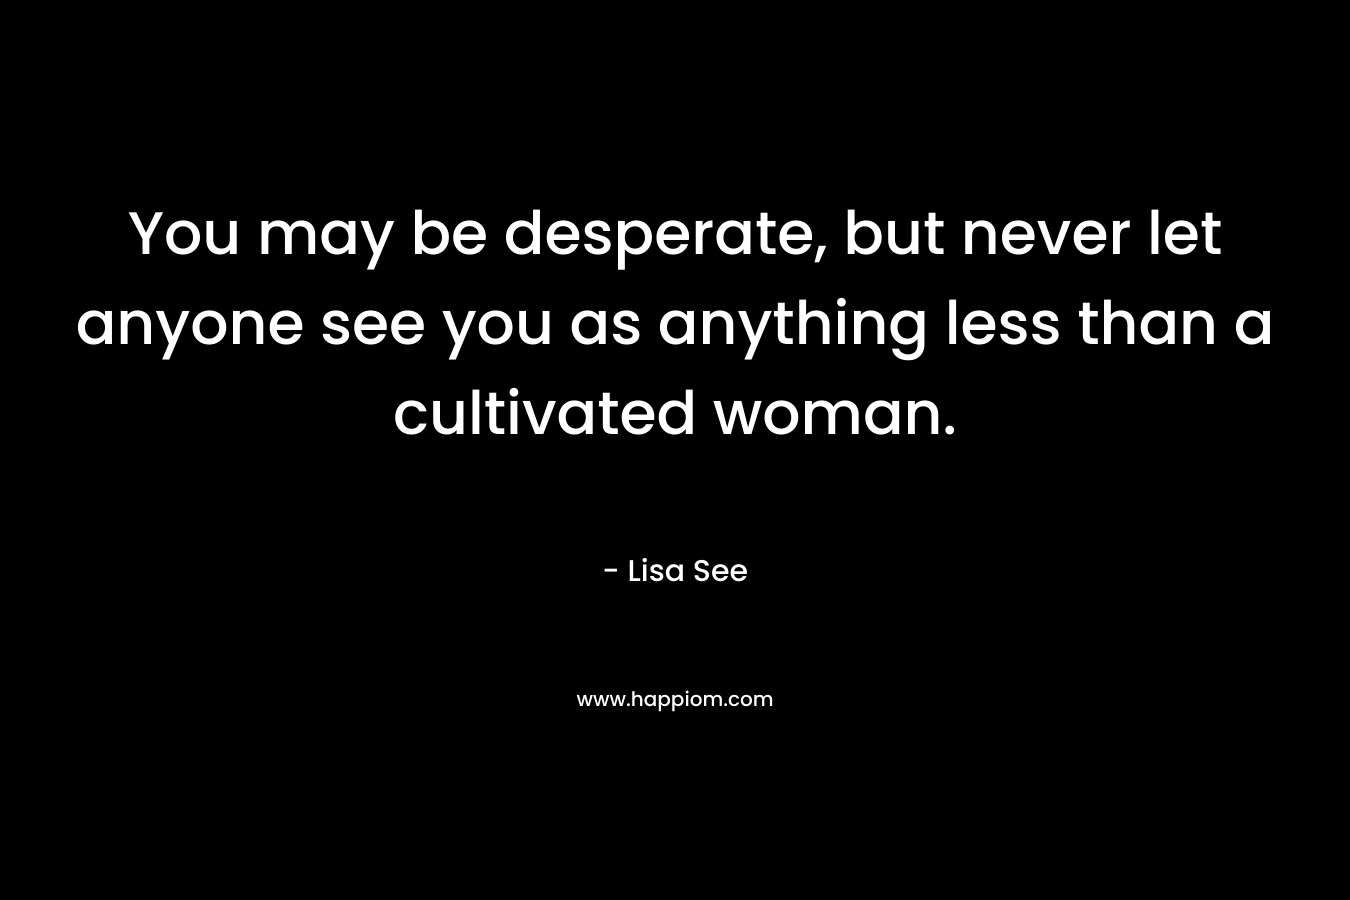 You may be desperate, but never let anyone see you as anything less than a cultivated woman. – Lisa See